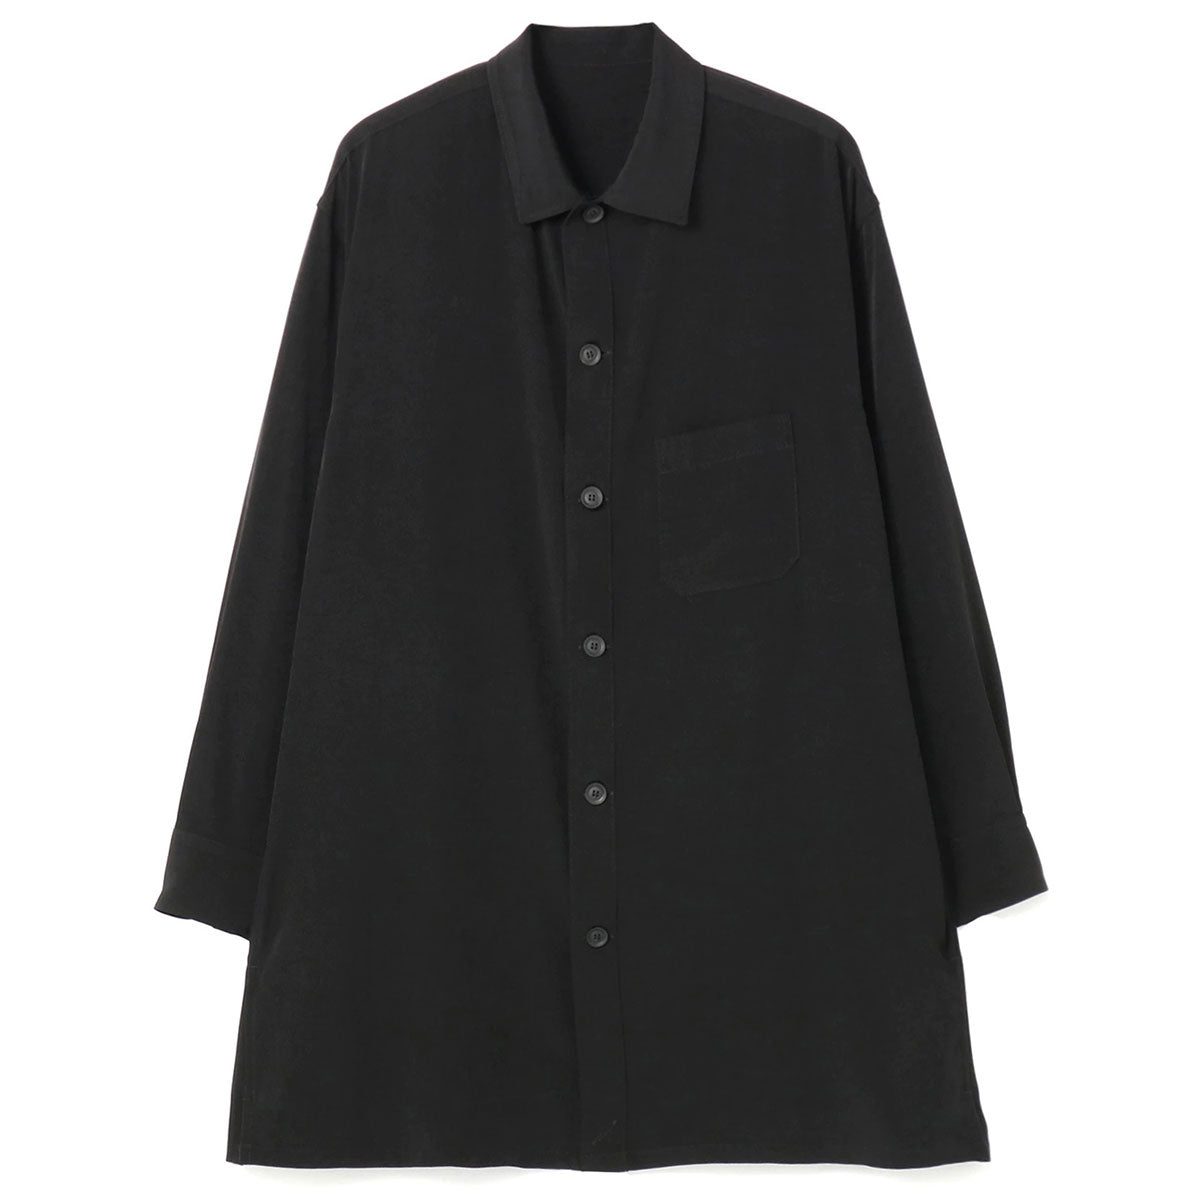 TA/TUXEDO OPEN COLLAR FRONT PLACKET BLOUSE | Why are you here?